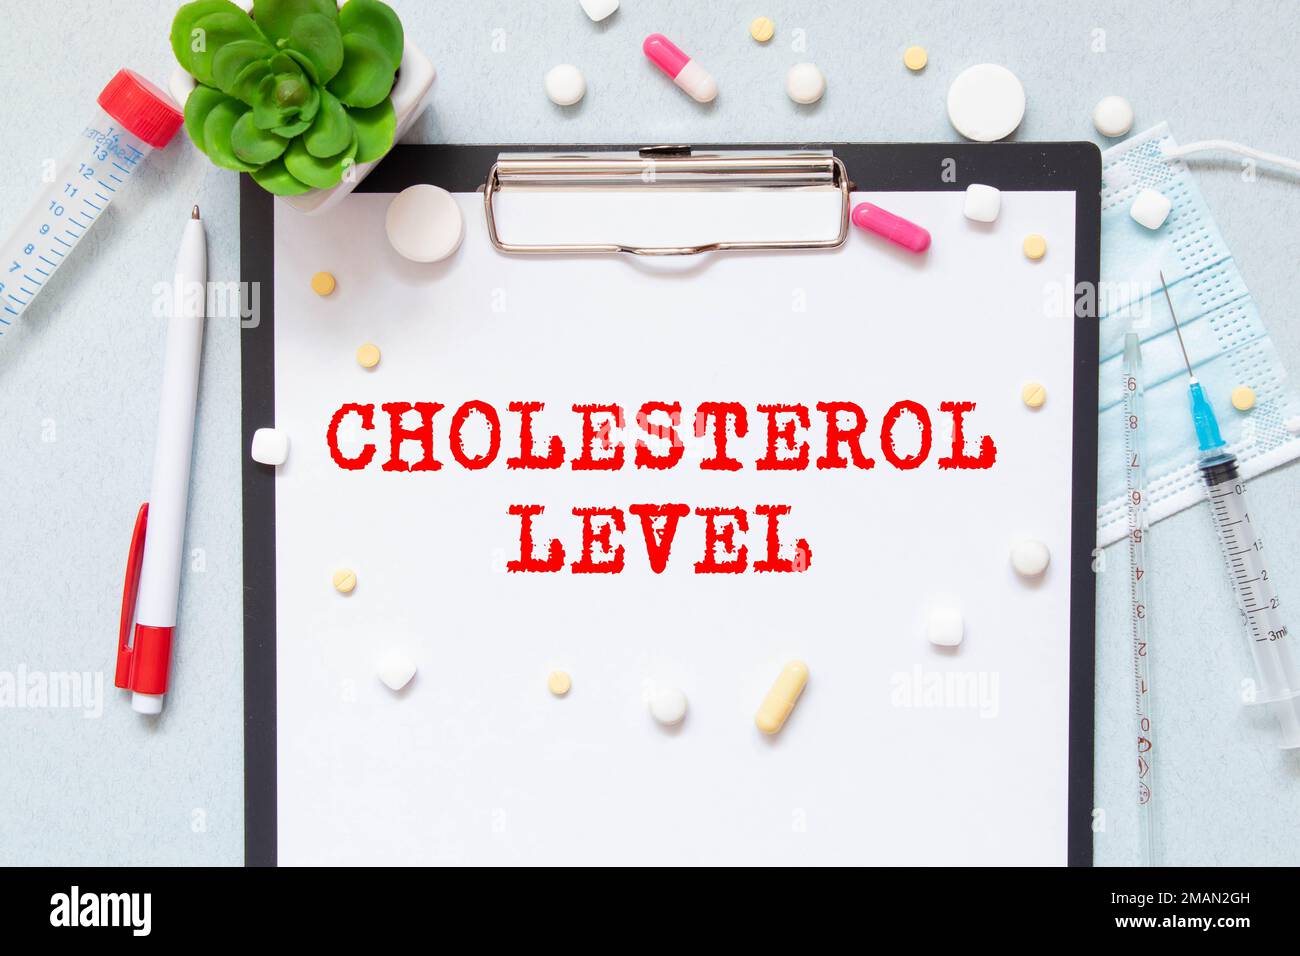 Cholesterol level text on a card clip to a sheet of notepad on a desk, business concept. Stock Photo